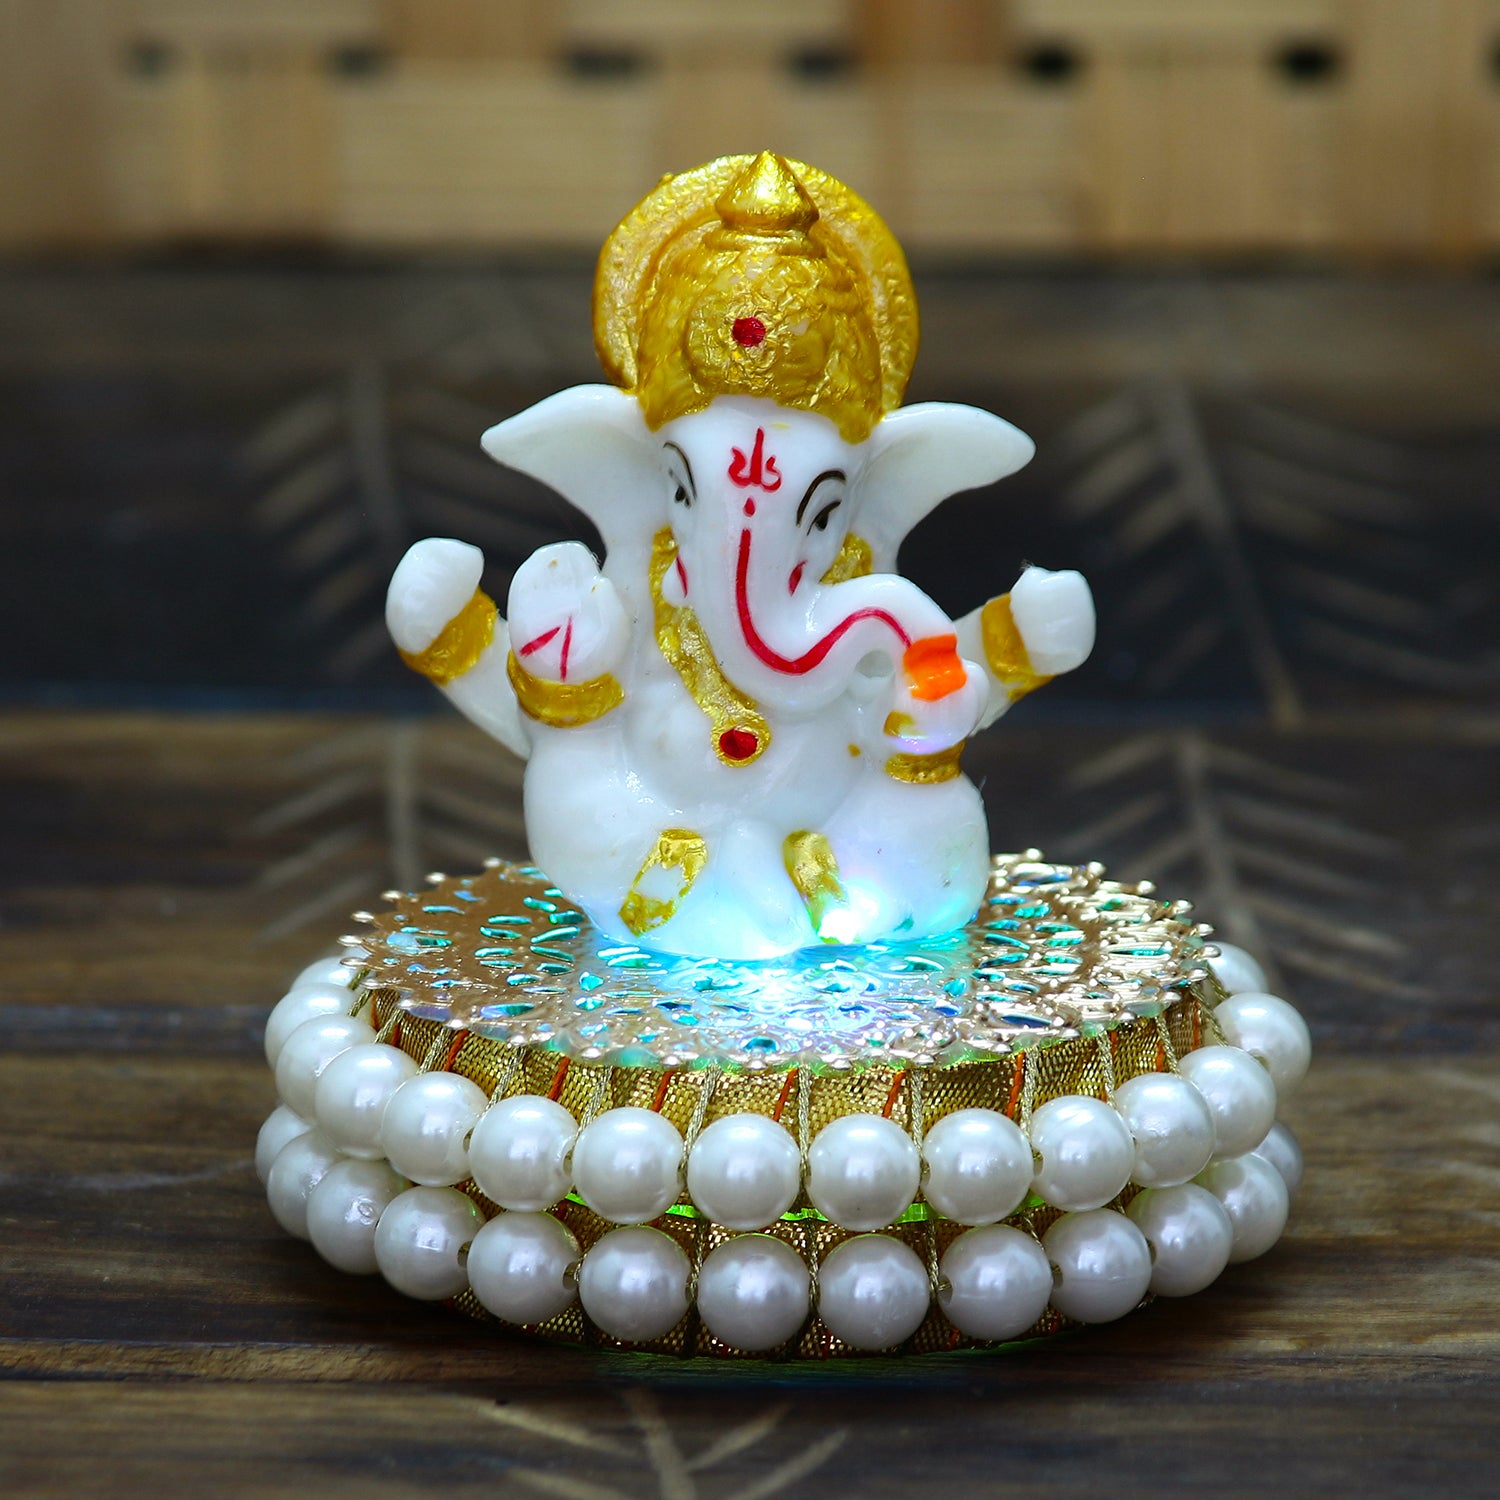 Gold and White Polyresin Lord Ganesha Idol on Decorative Handcrafted Plate for Home and Car Dashboard